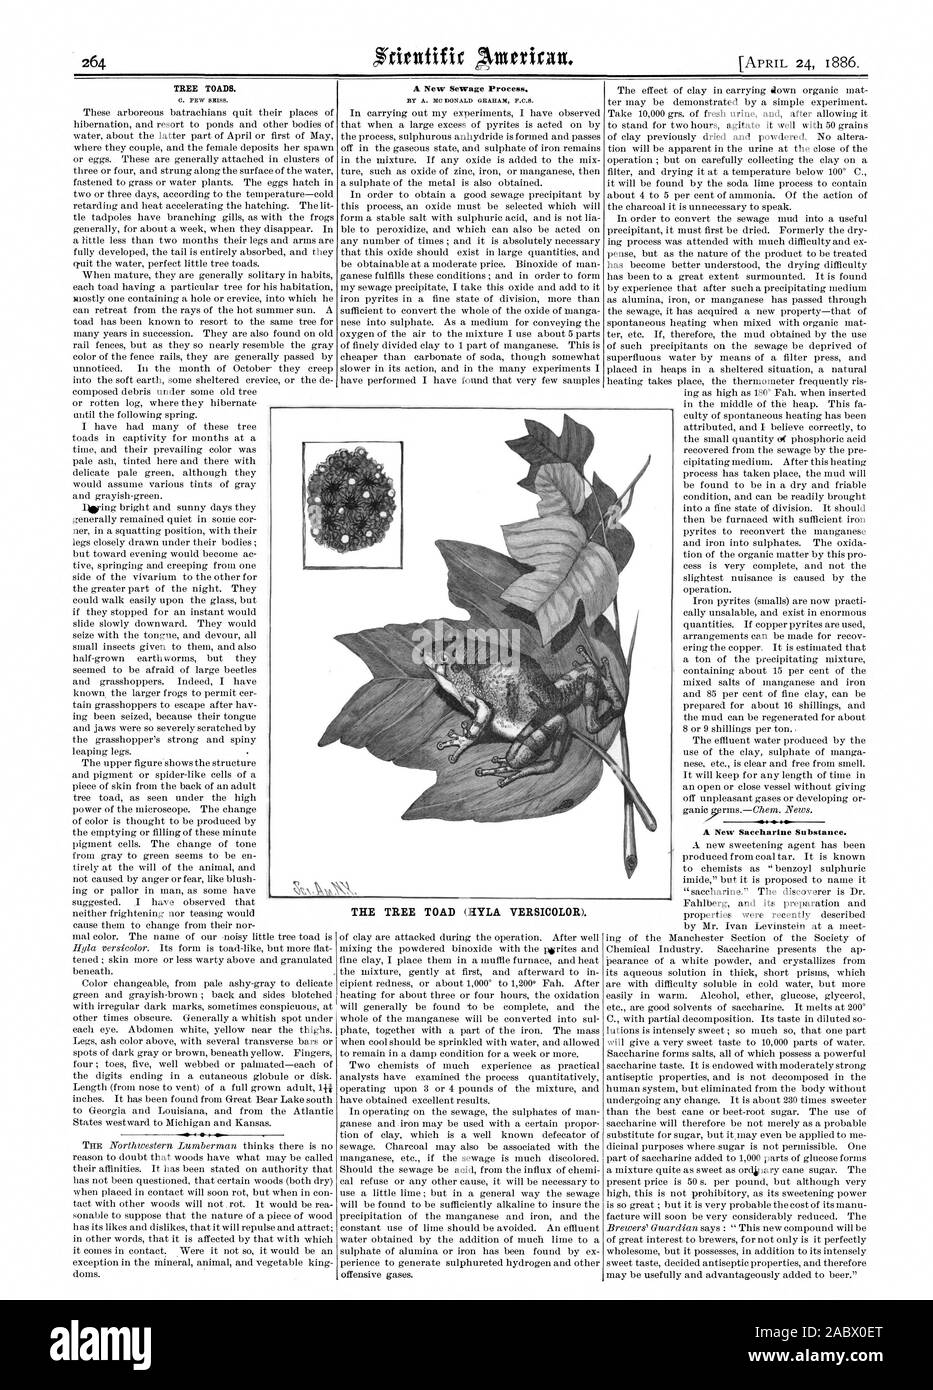 TREE TOADS. C. FEW SEM. A New Sewage Process. BY A. MC DONALD GRAHAM P.0.13. S  A New Saccharine Substance. THE TREE TOAD (HYLA VERSICOLOR)., scientific american, 1886-04-24 Stock Photo